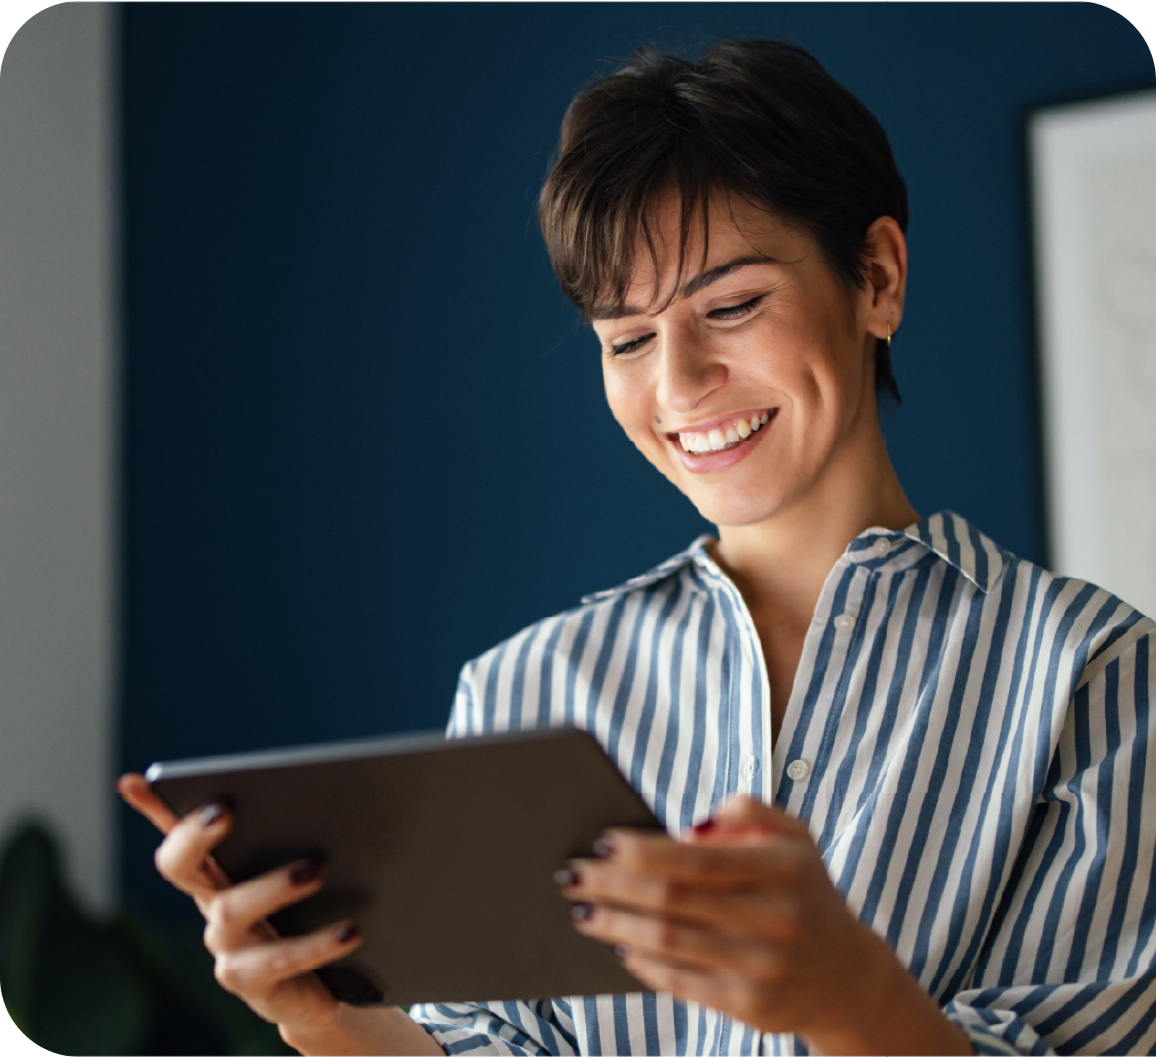 A woman smiling while looking at tablet screen